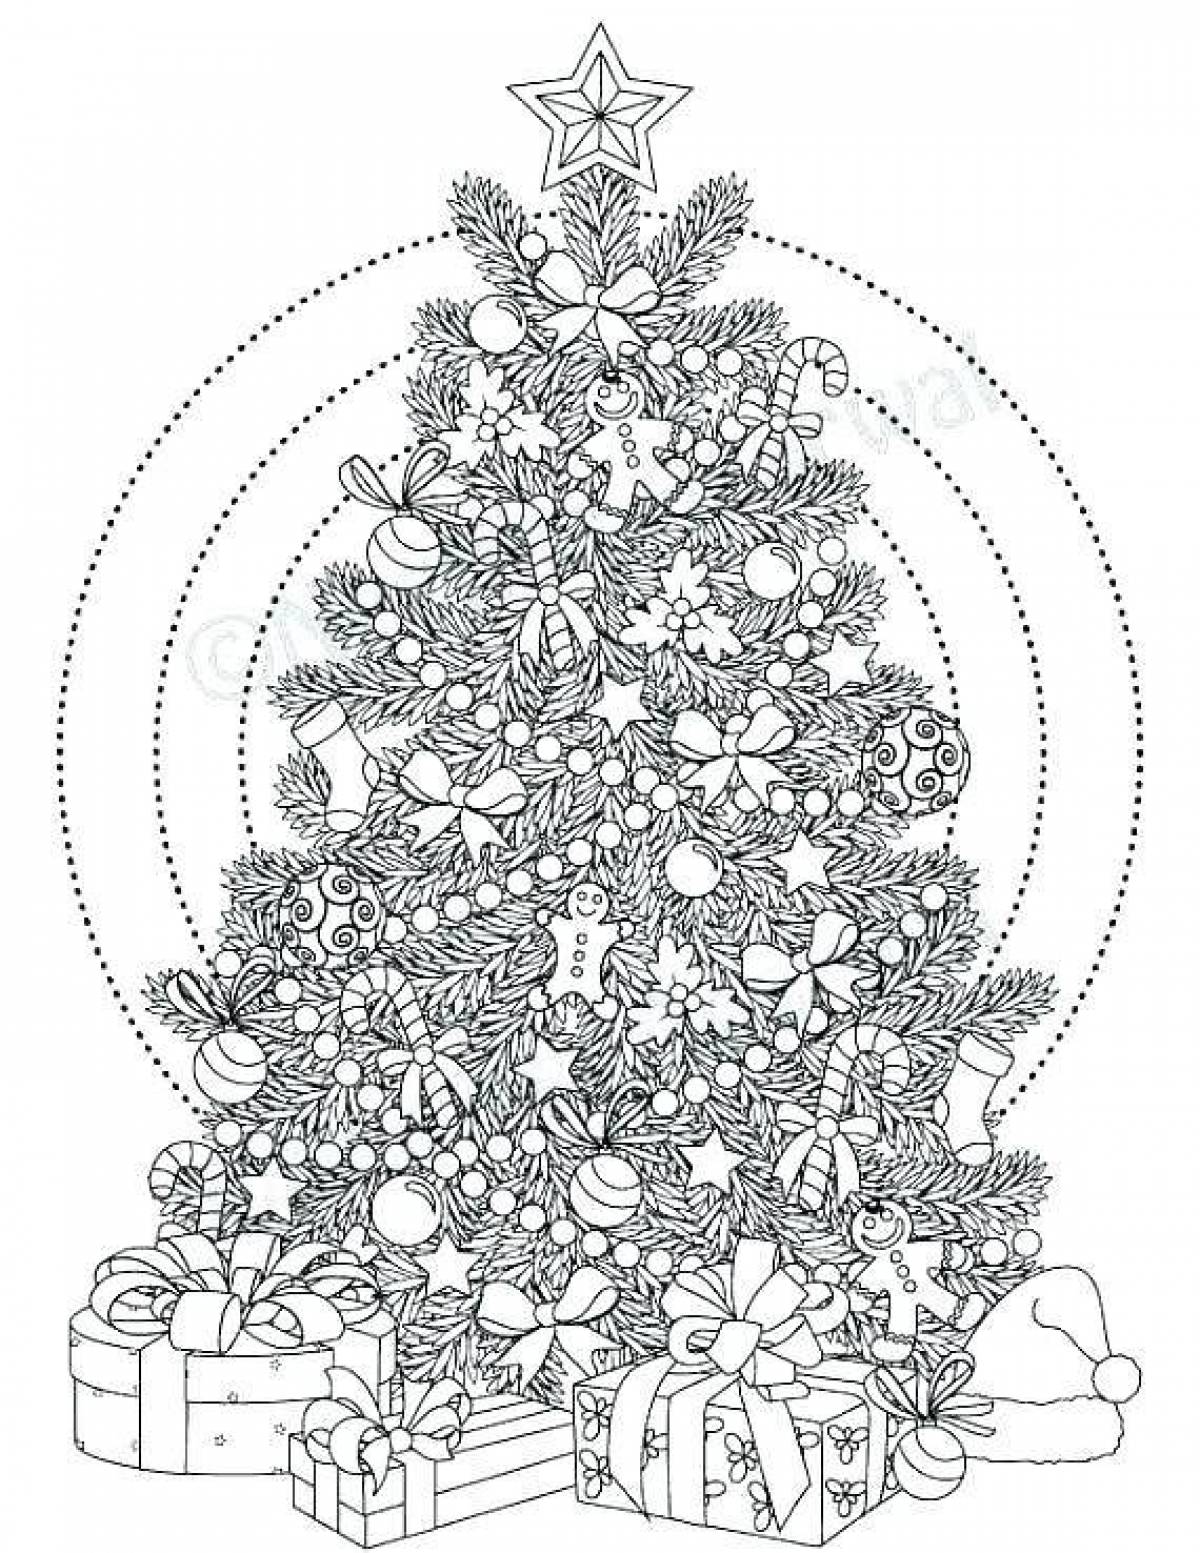 Dazzling Christmas complex coloring book